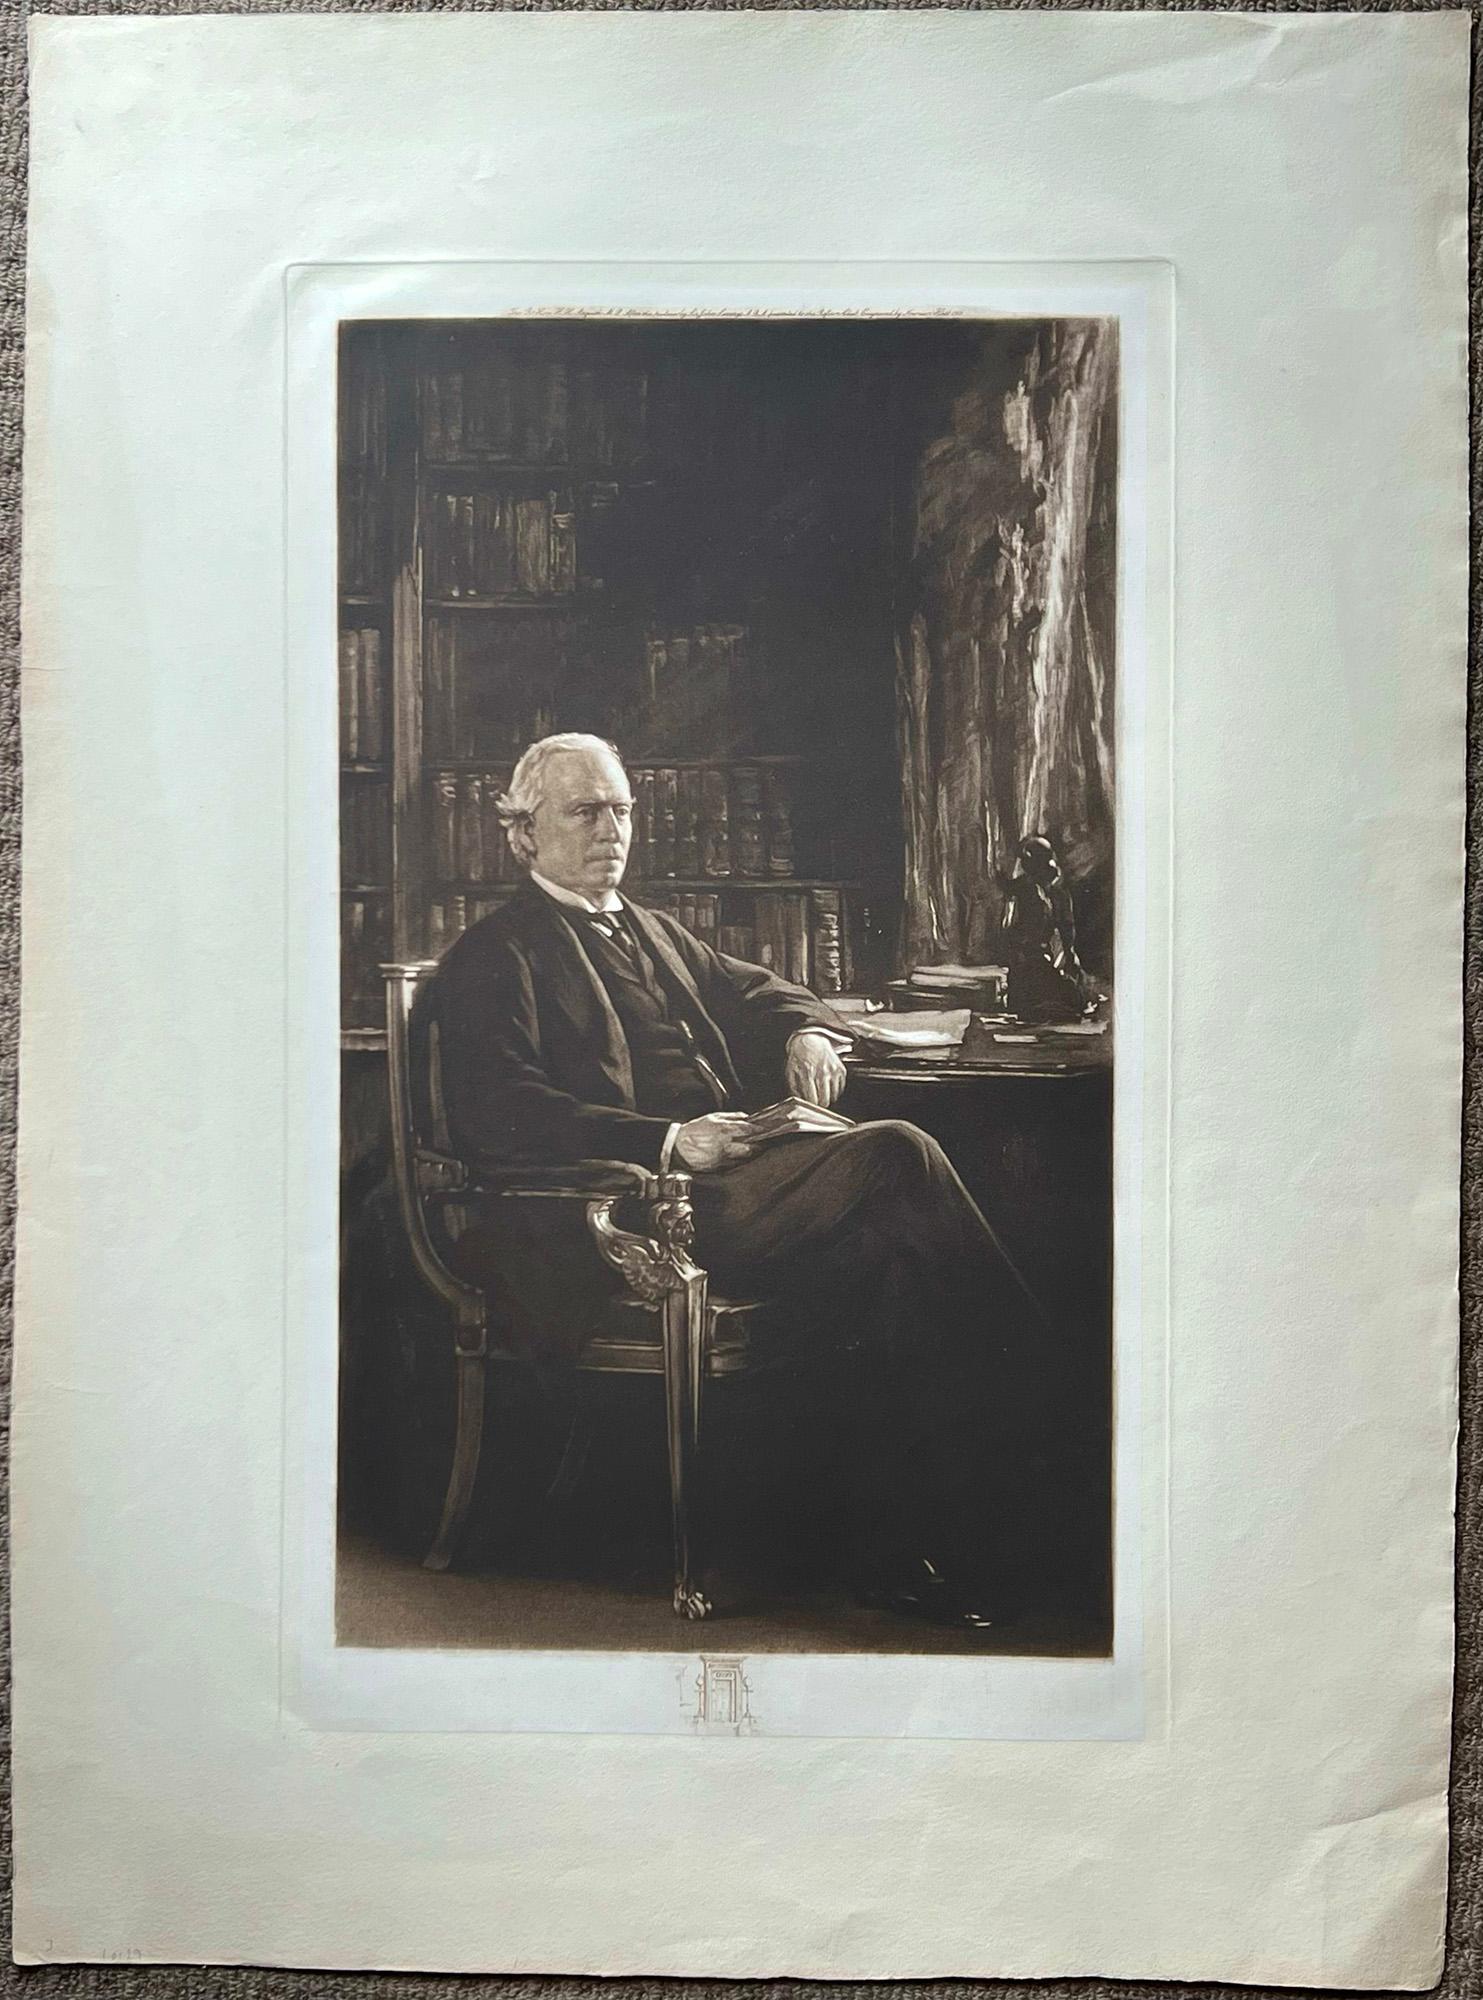 The Right Hon Henry Herbert Asquith, Prime Minister, portrait engraving  - Print by Sir John Lavery